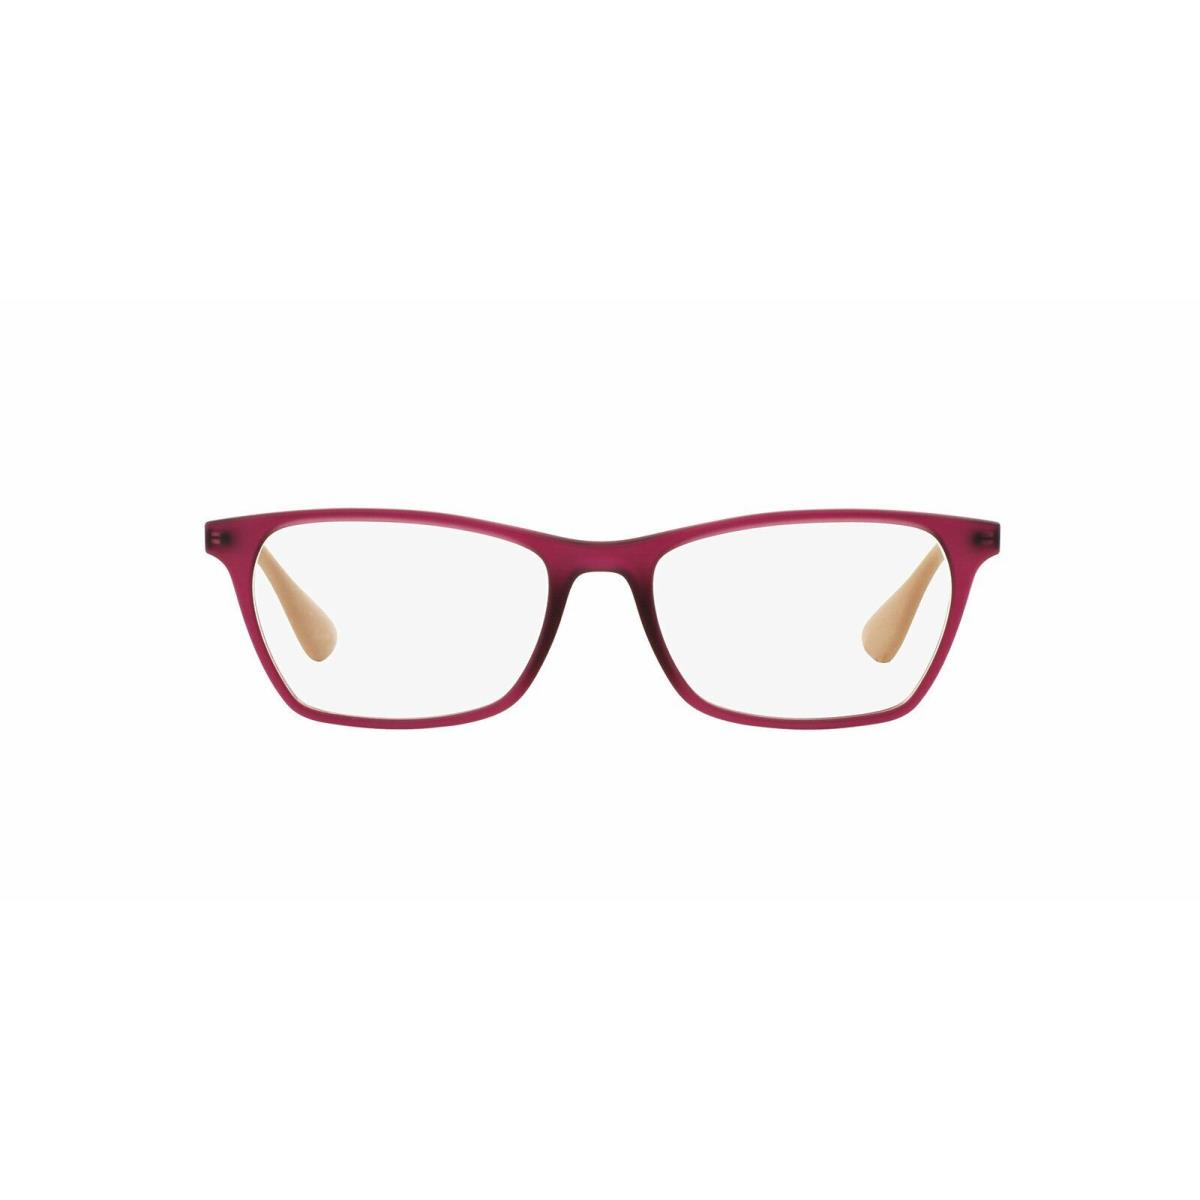 Ray Ban Eyeglasses RB7053 5526 Red 51mm Rx-able ST